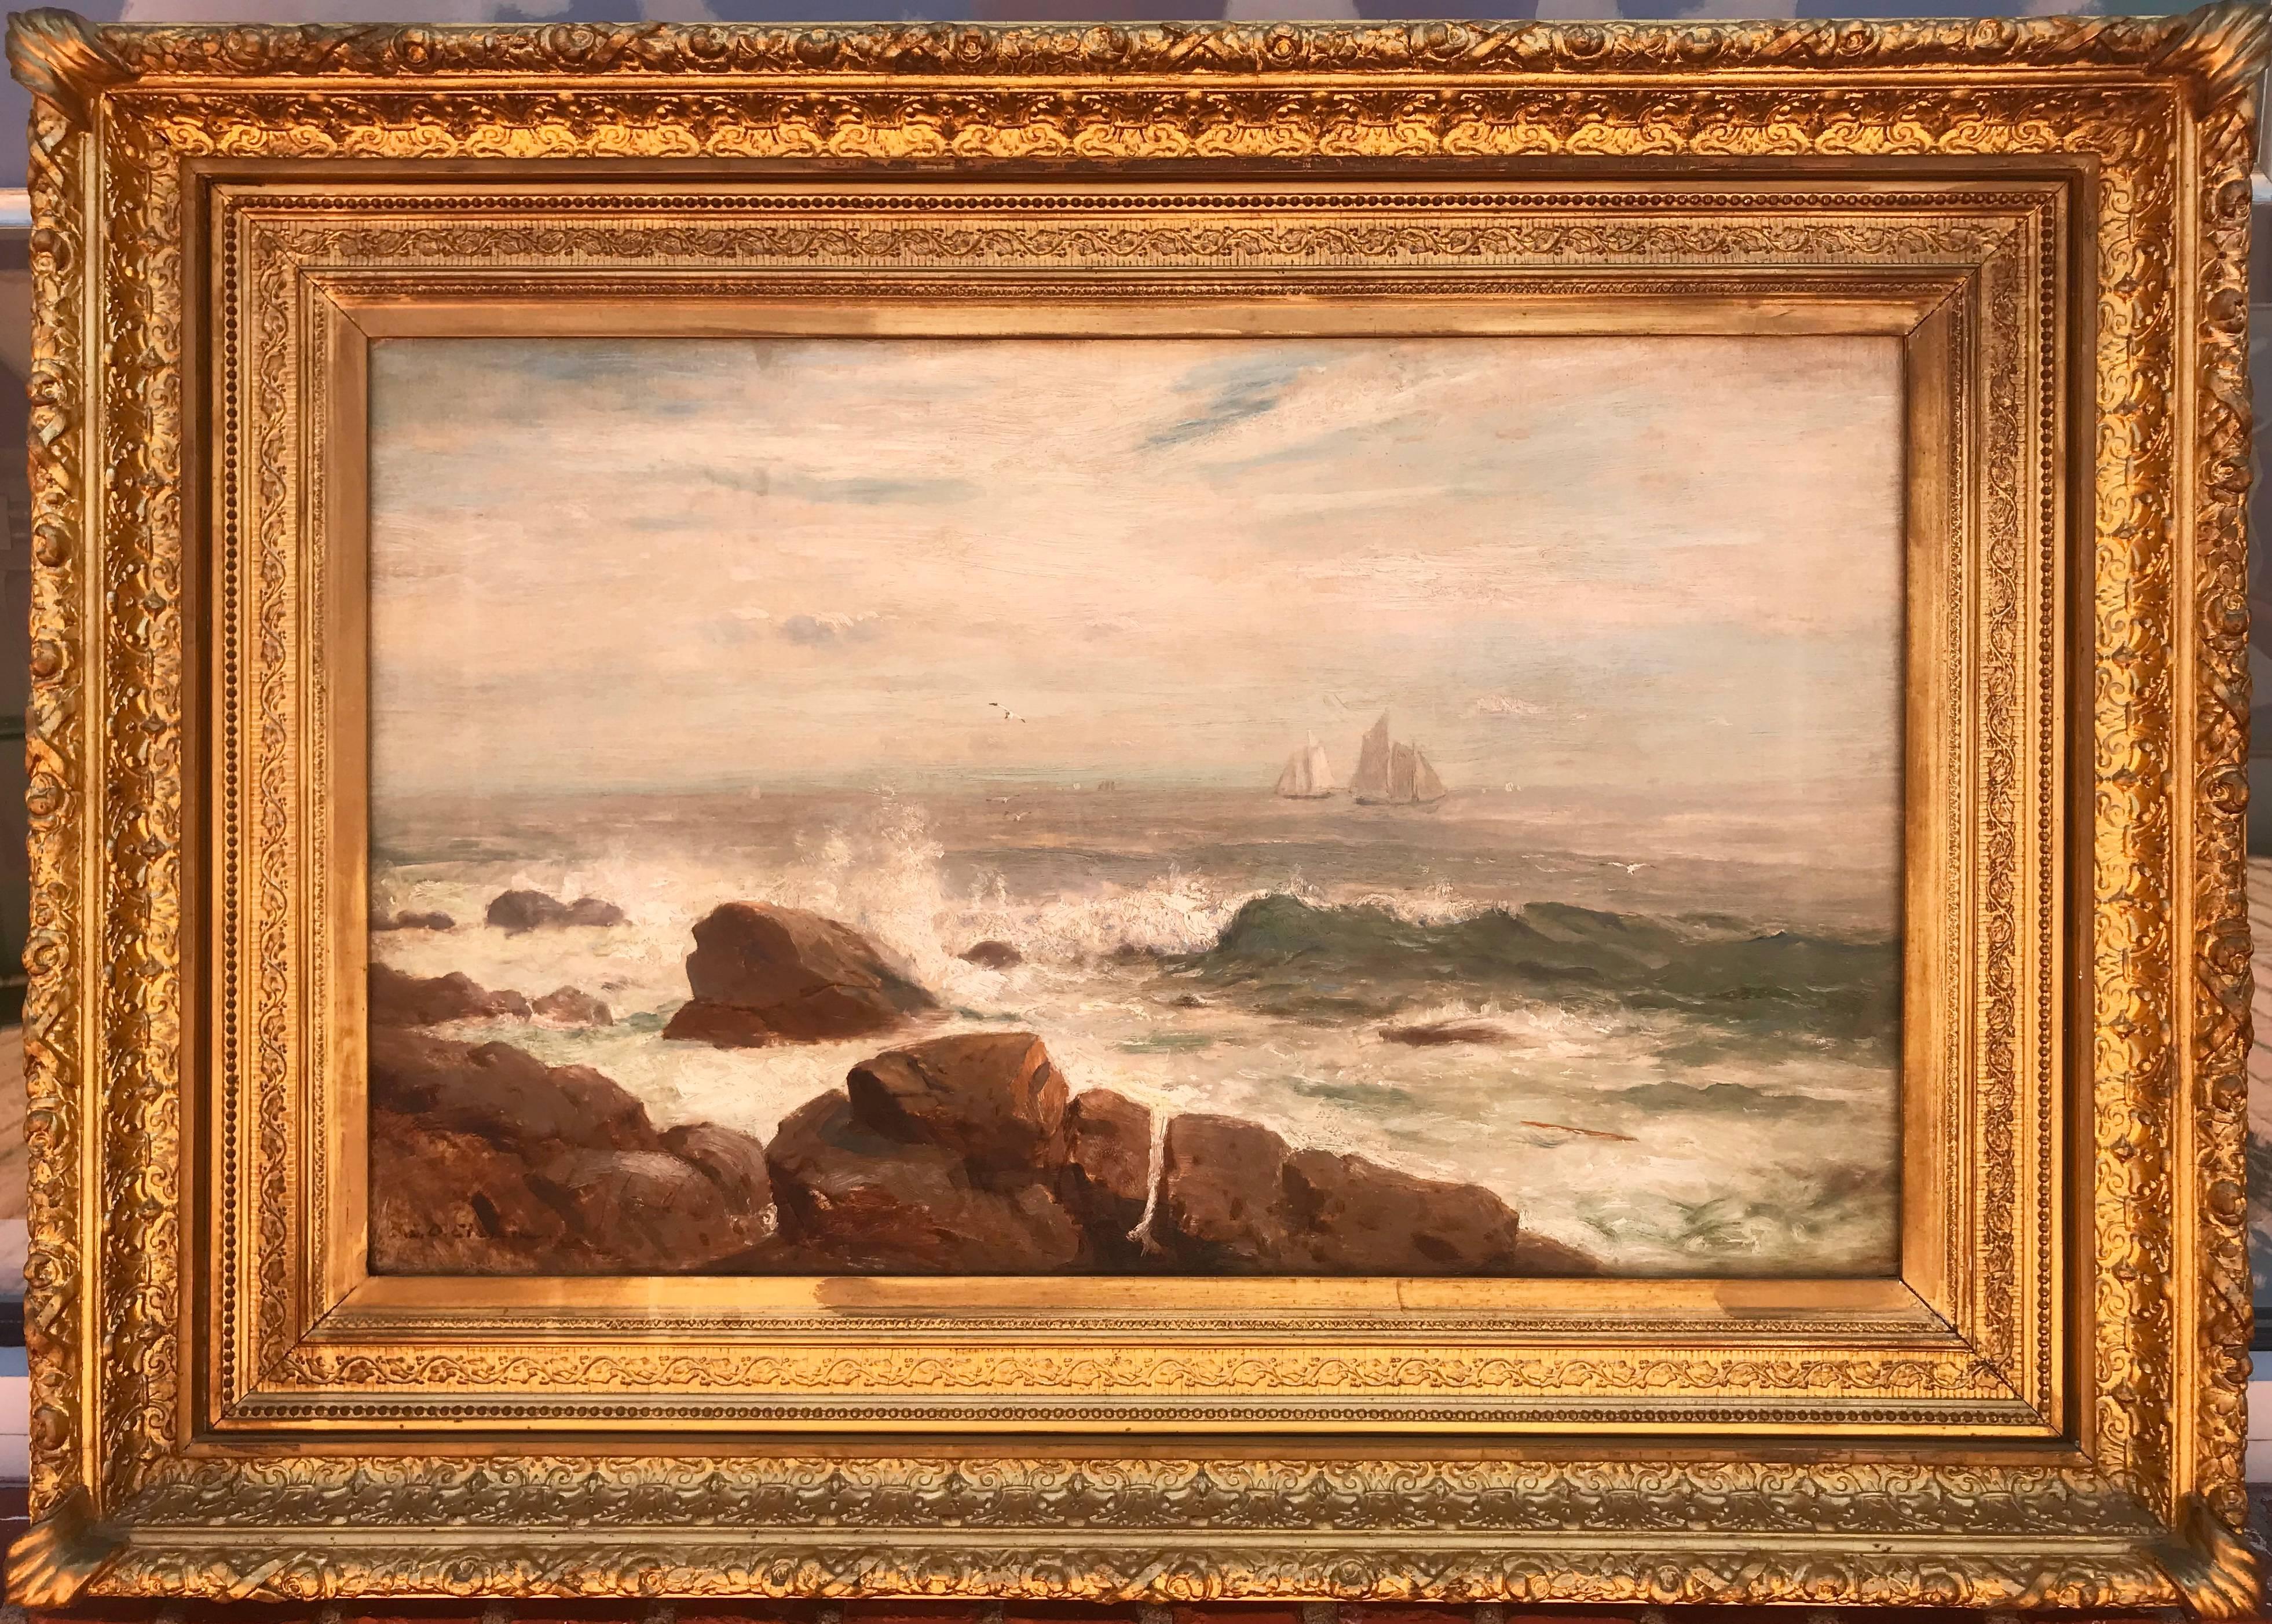 “Sailboats off the Coast” - Hudson River School Painting by Lemuel D. Eldred